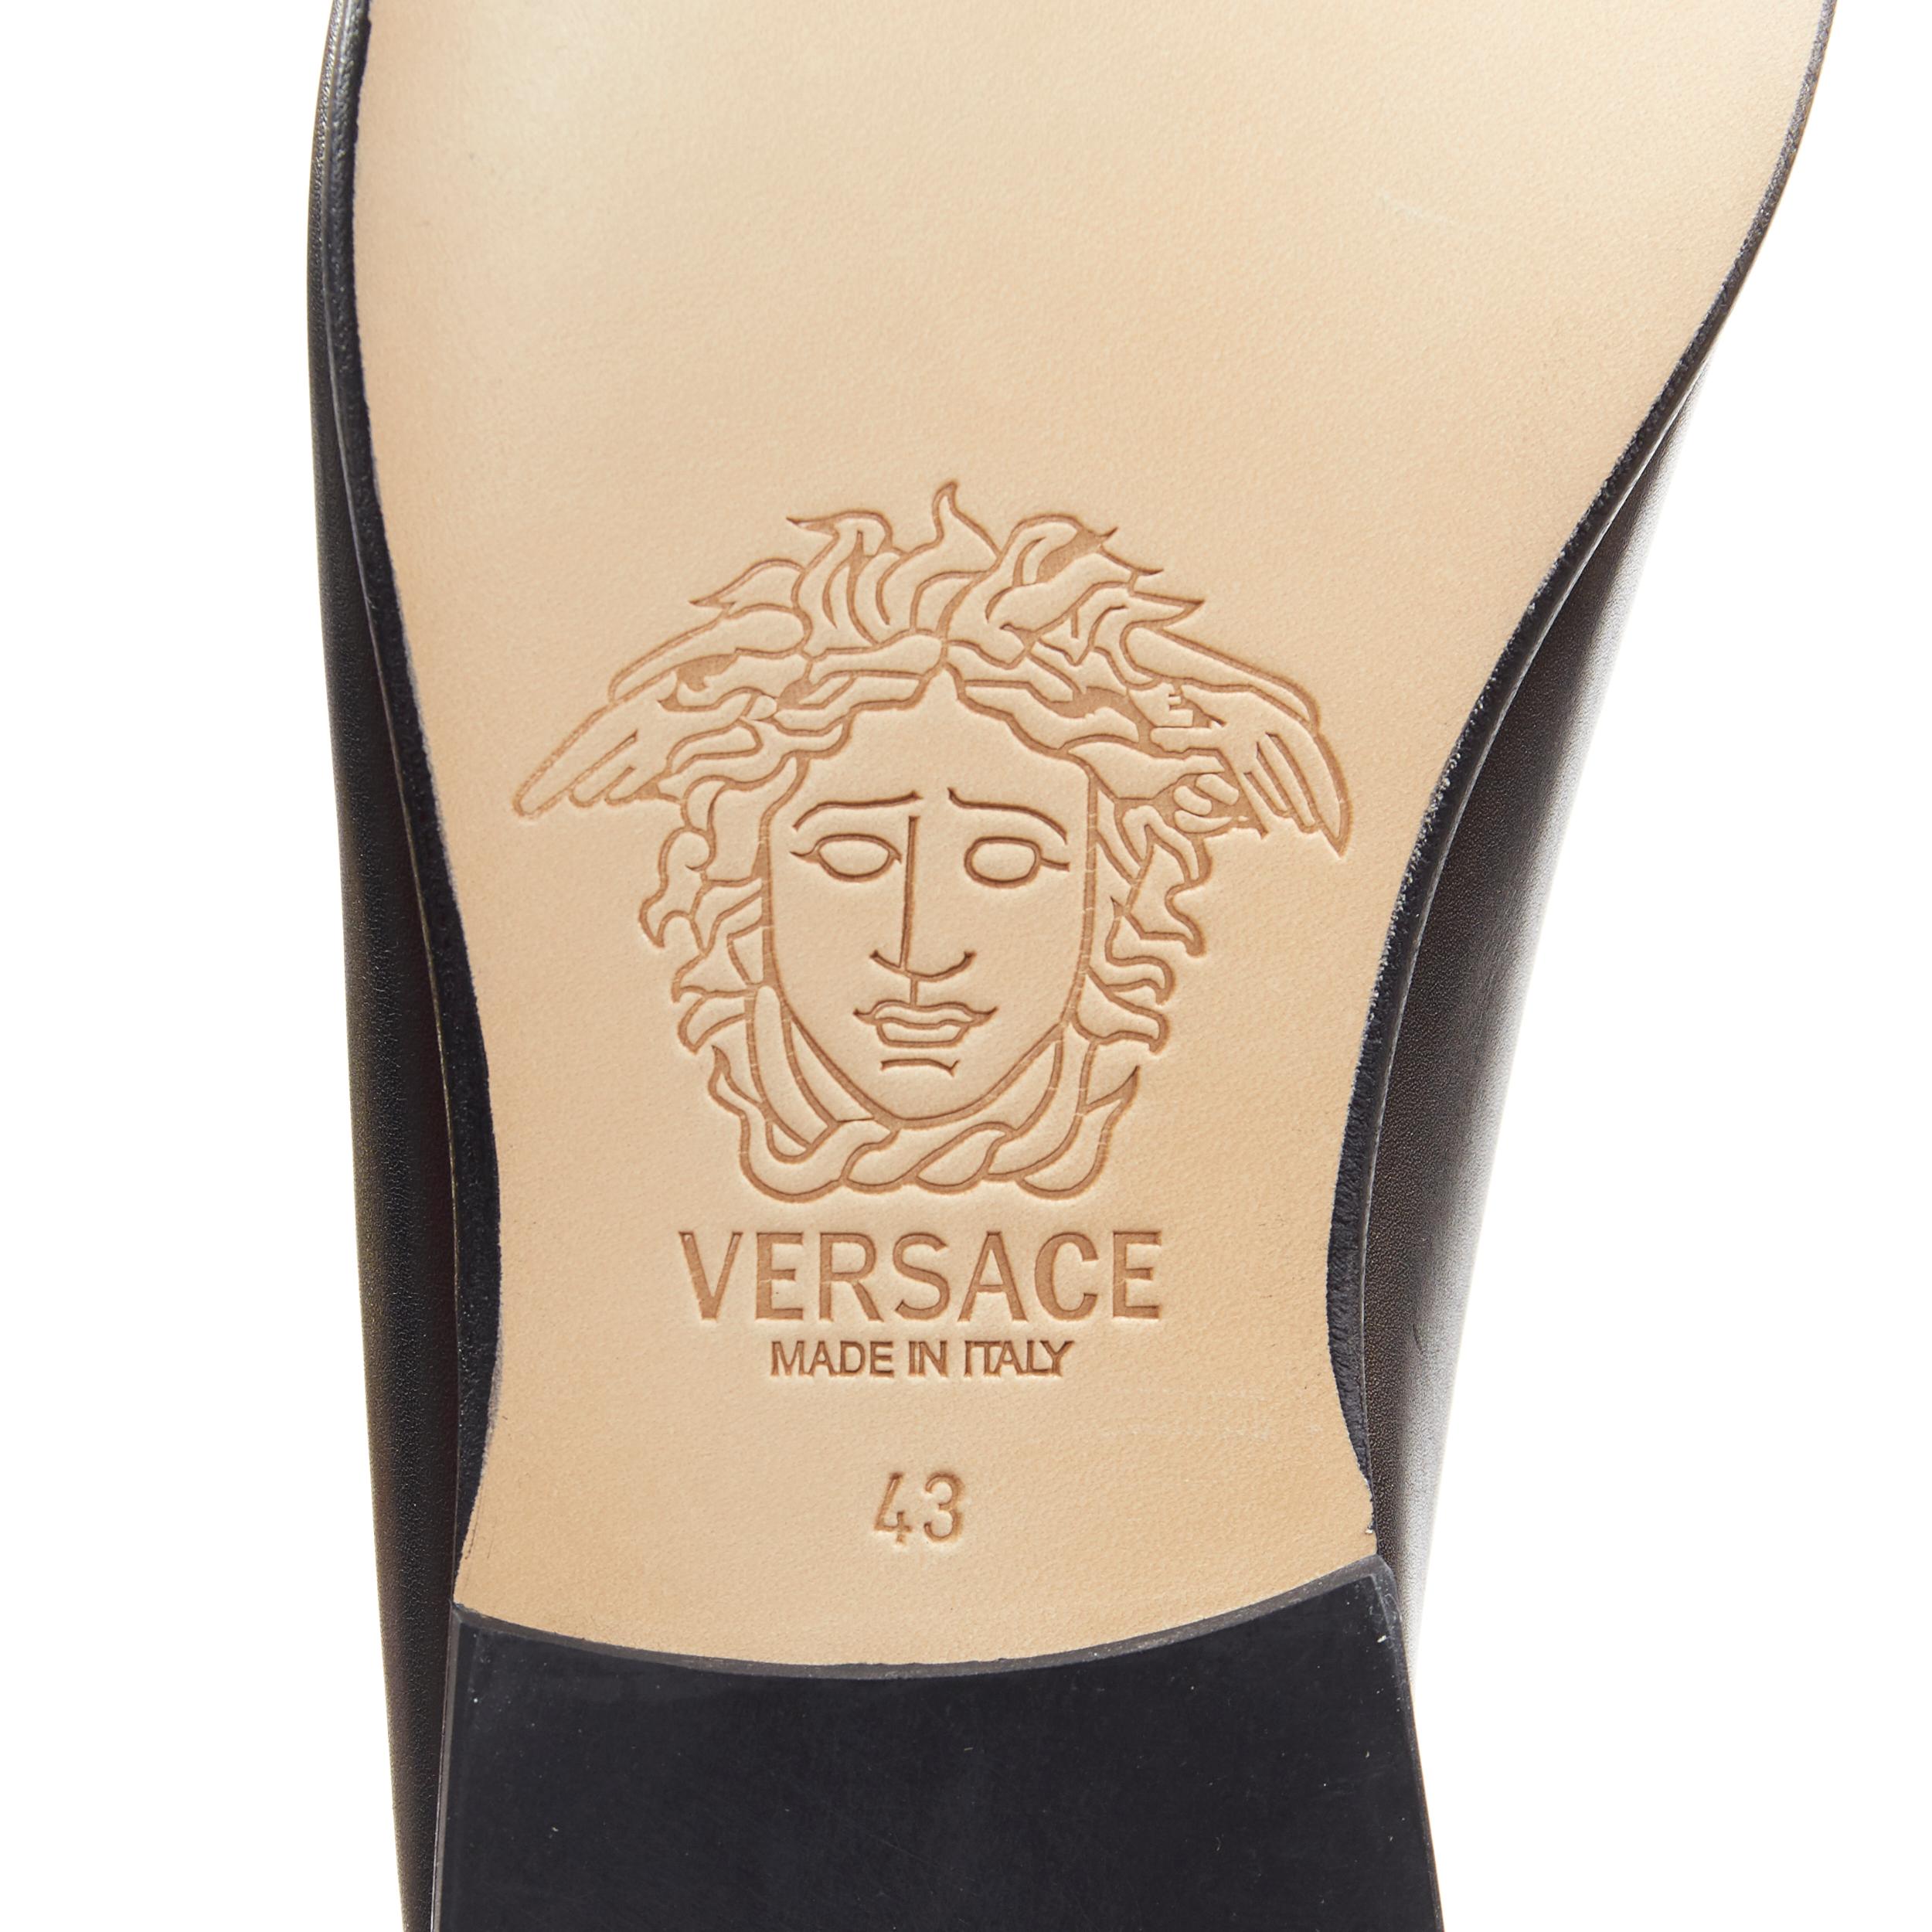 new VERSACE black leather gold Medusa embroidery le smoking slipper loafer EU43 3